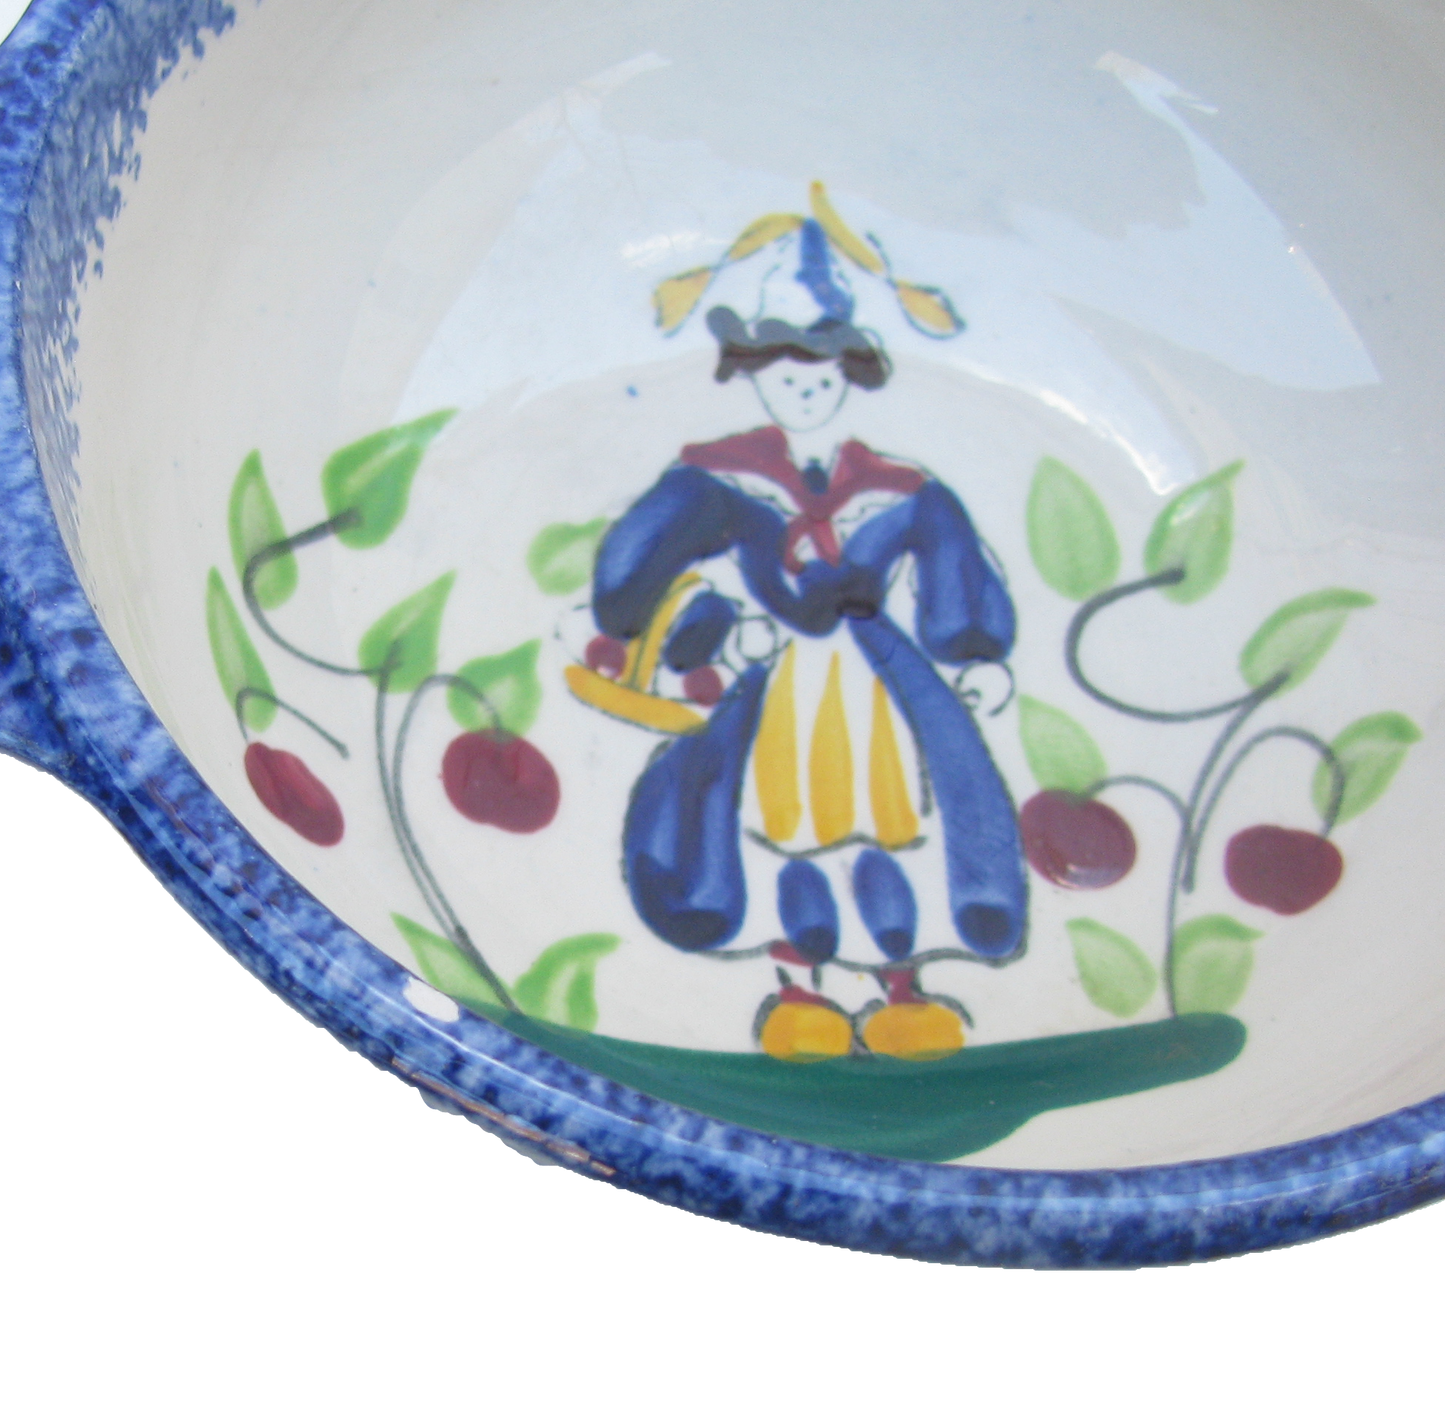 French Quimper Faience Pottery, Set of 3